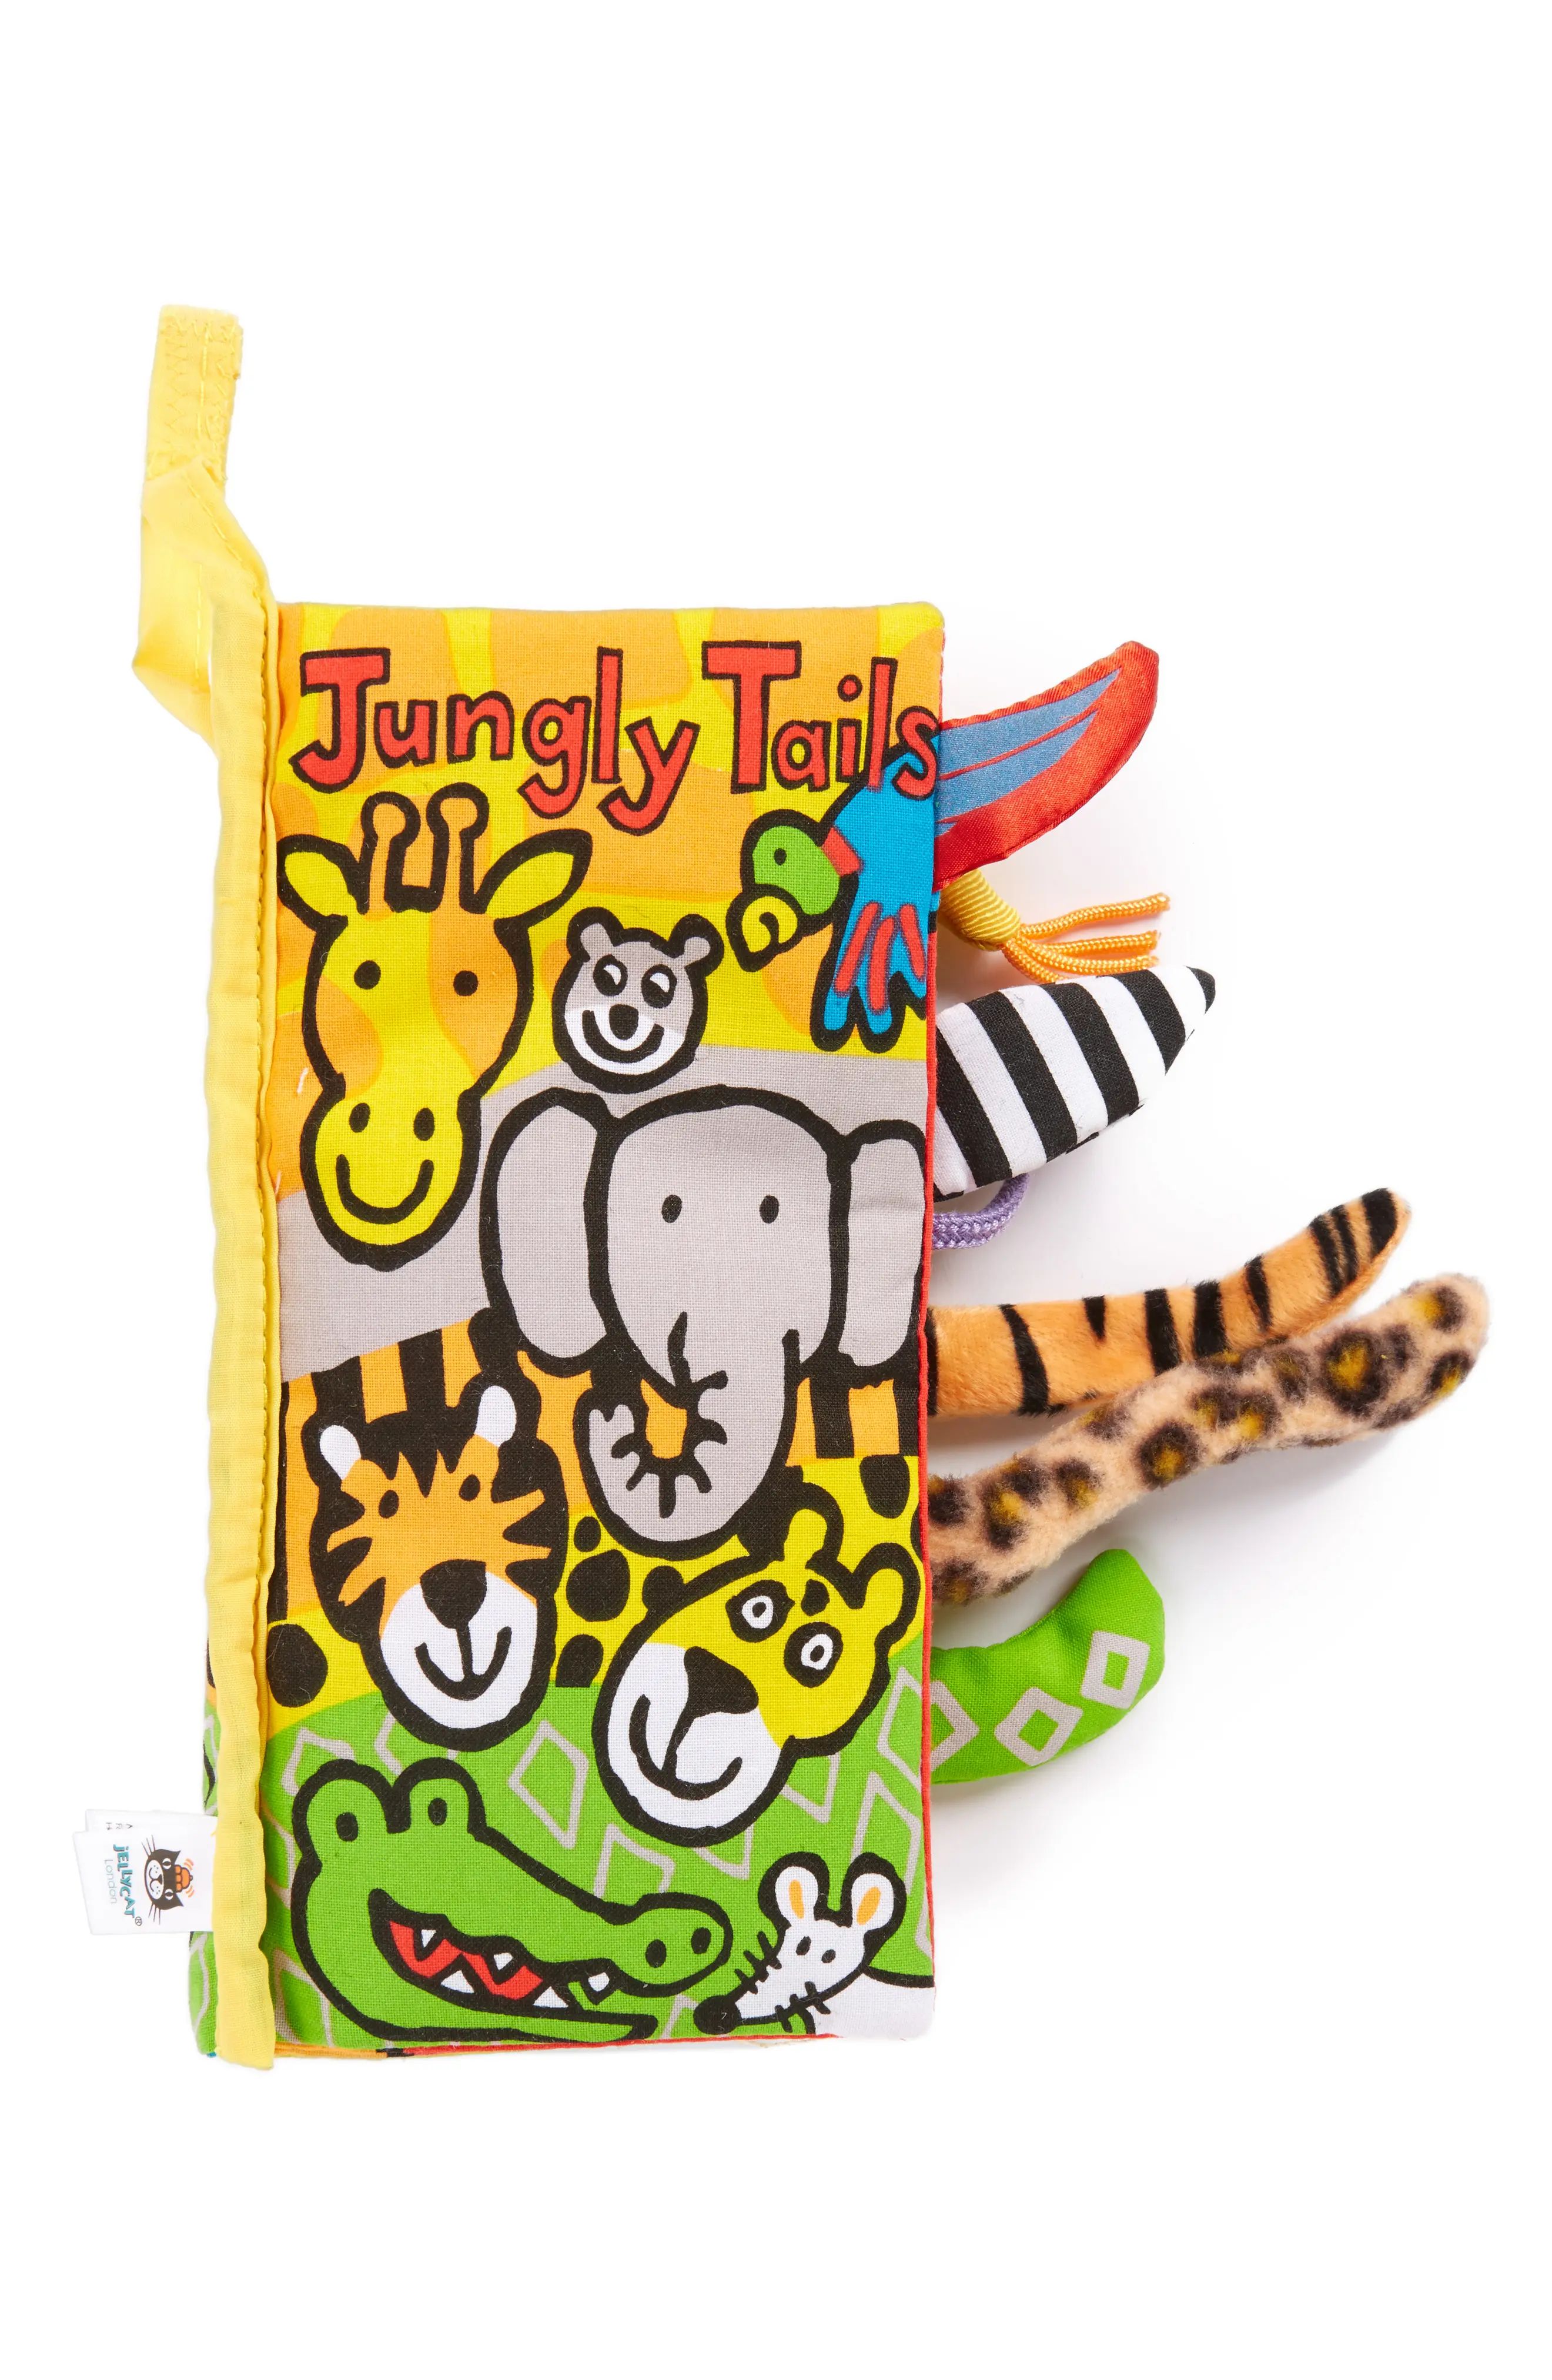 Jungly Tails Cloth Book | Nordstrom